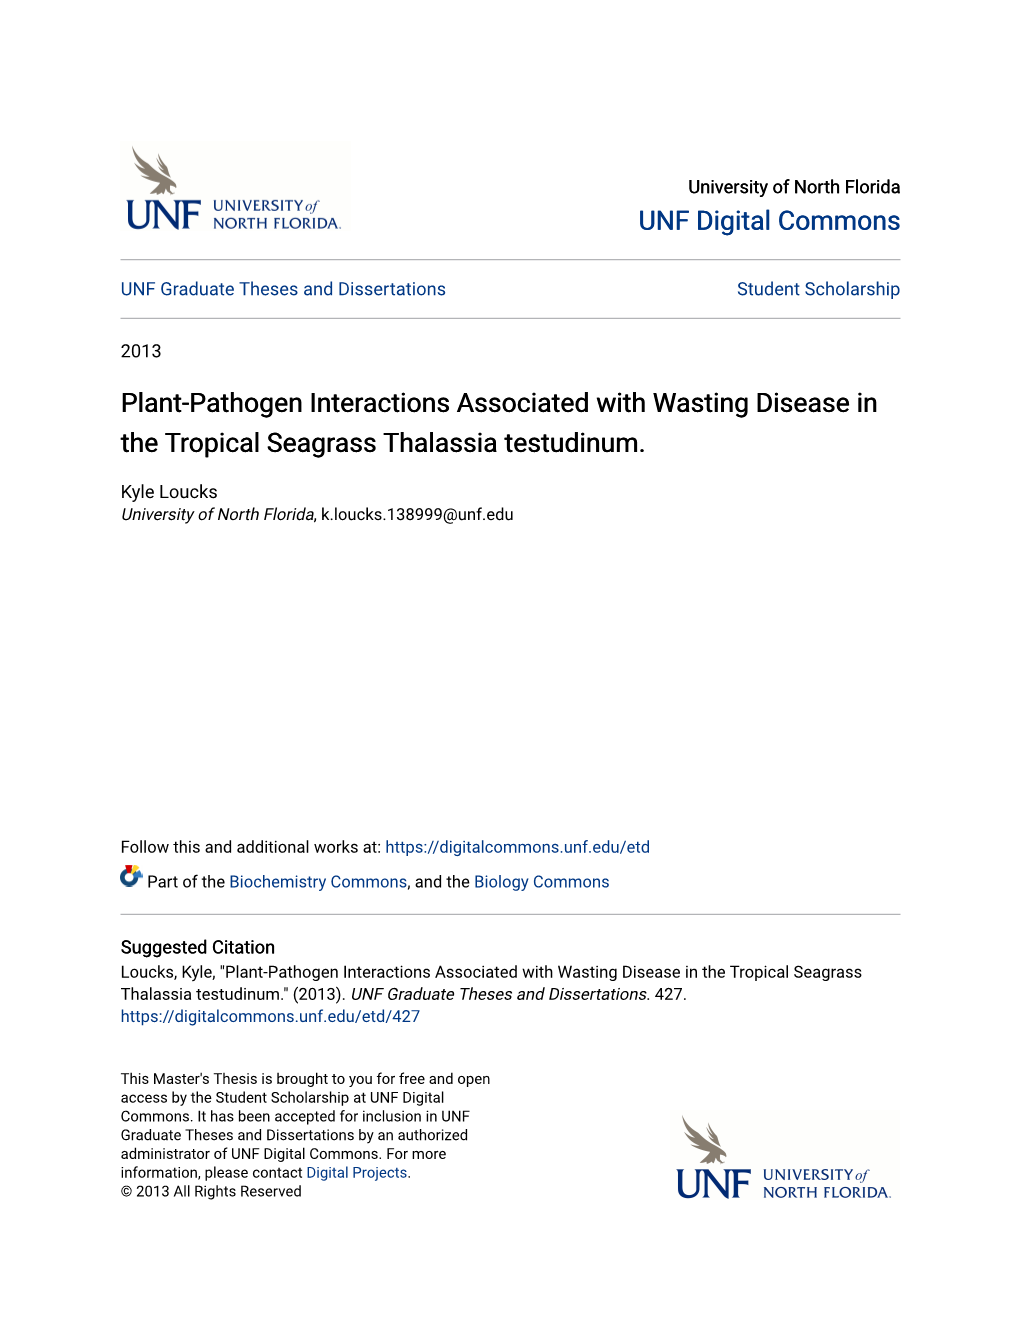 Plant-Pathogen Interactions Associated with Wasting Disease in the Tropical Seagrass Thalassia Testudinum